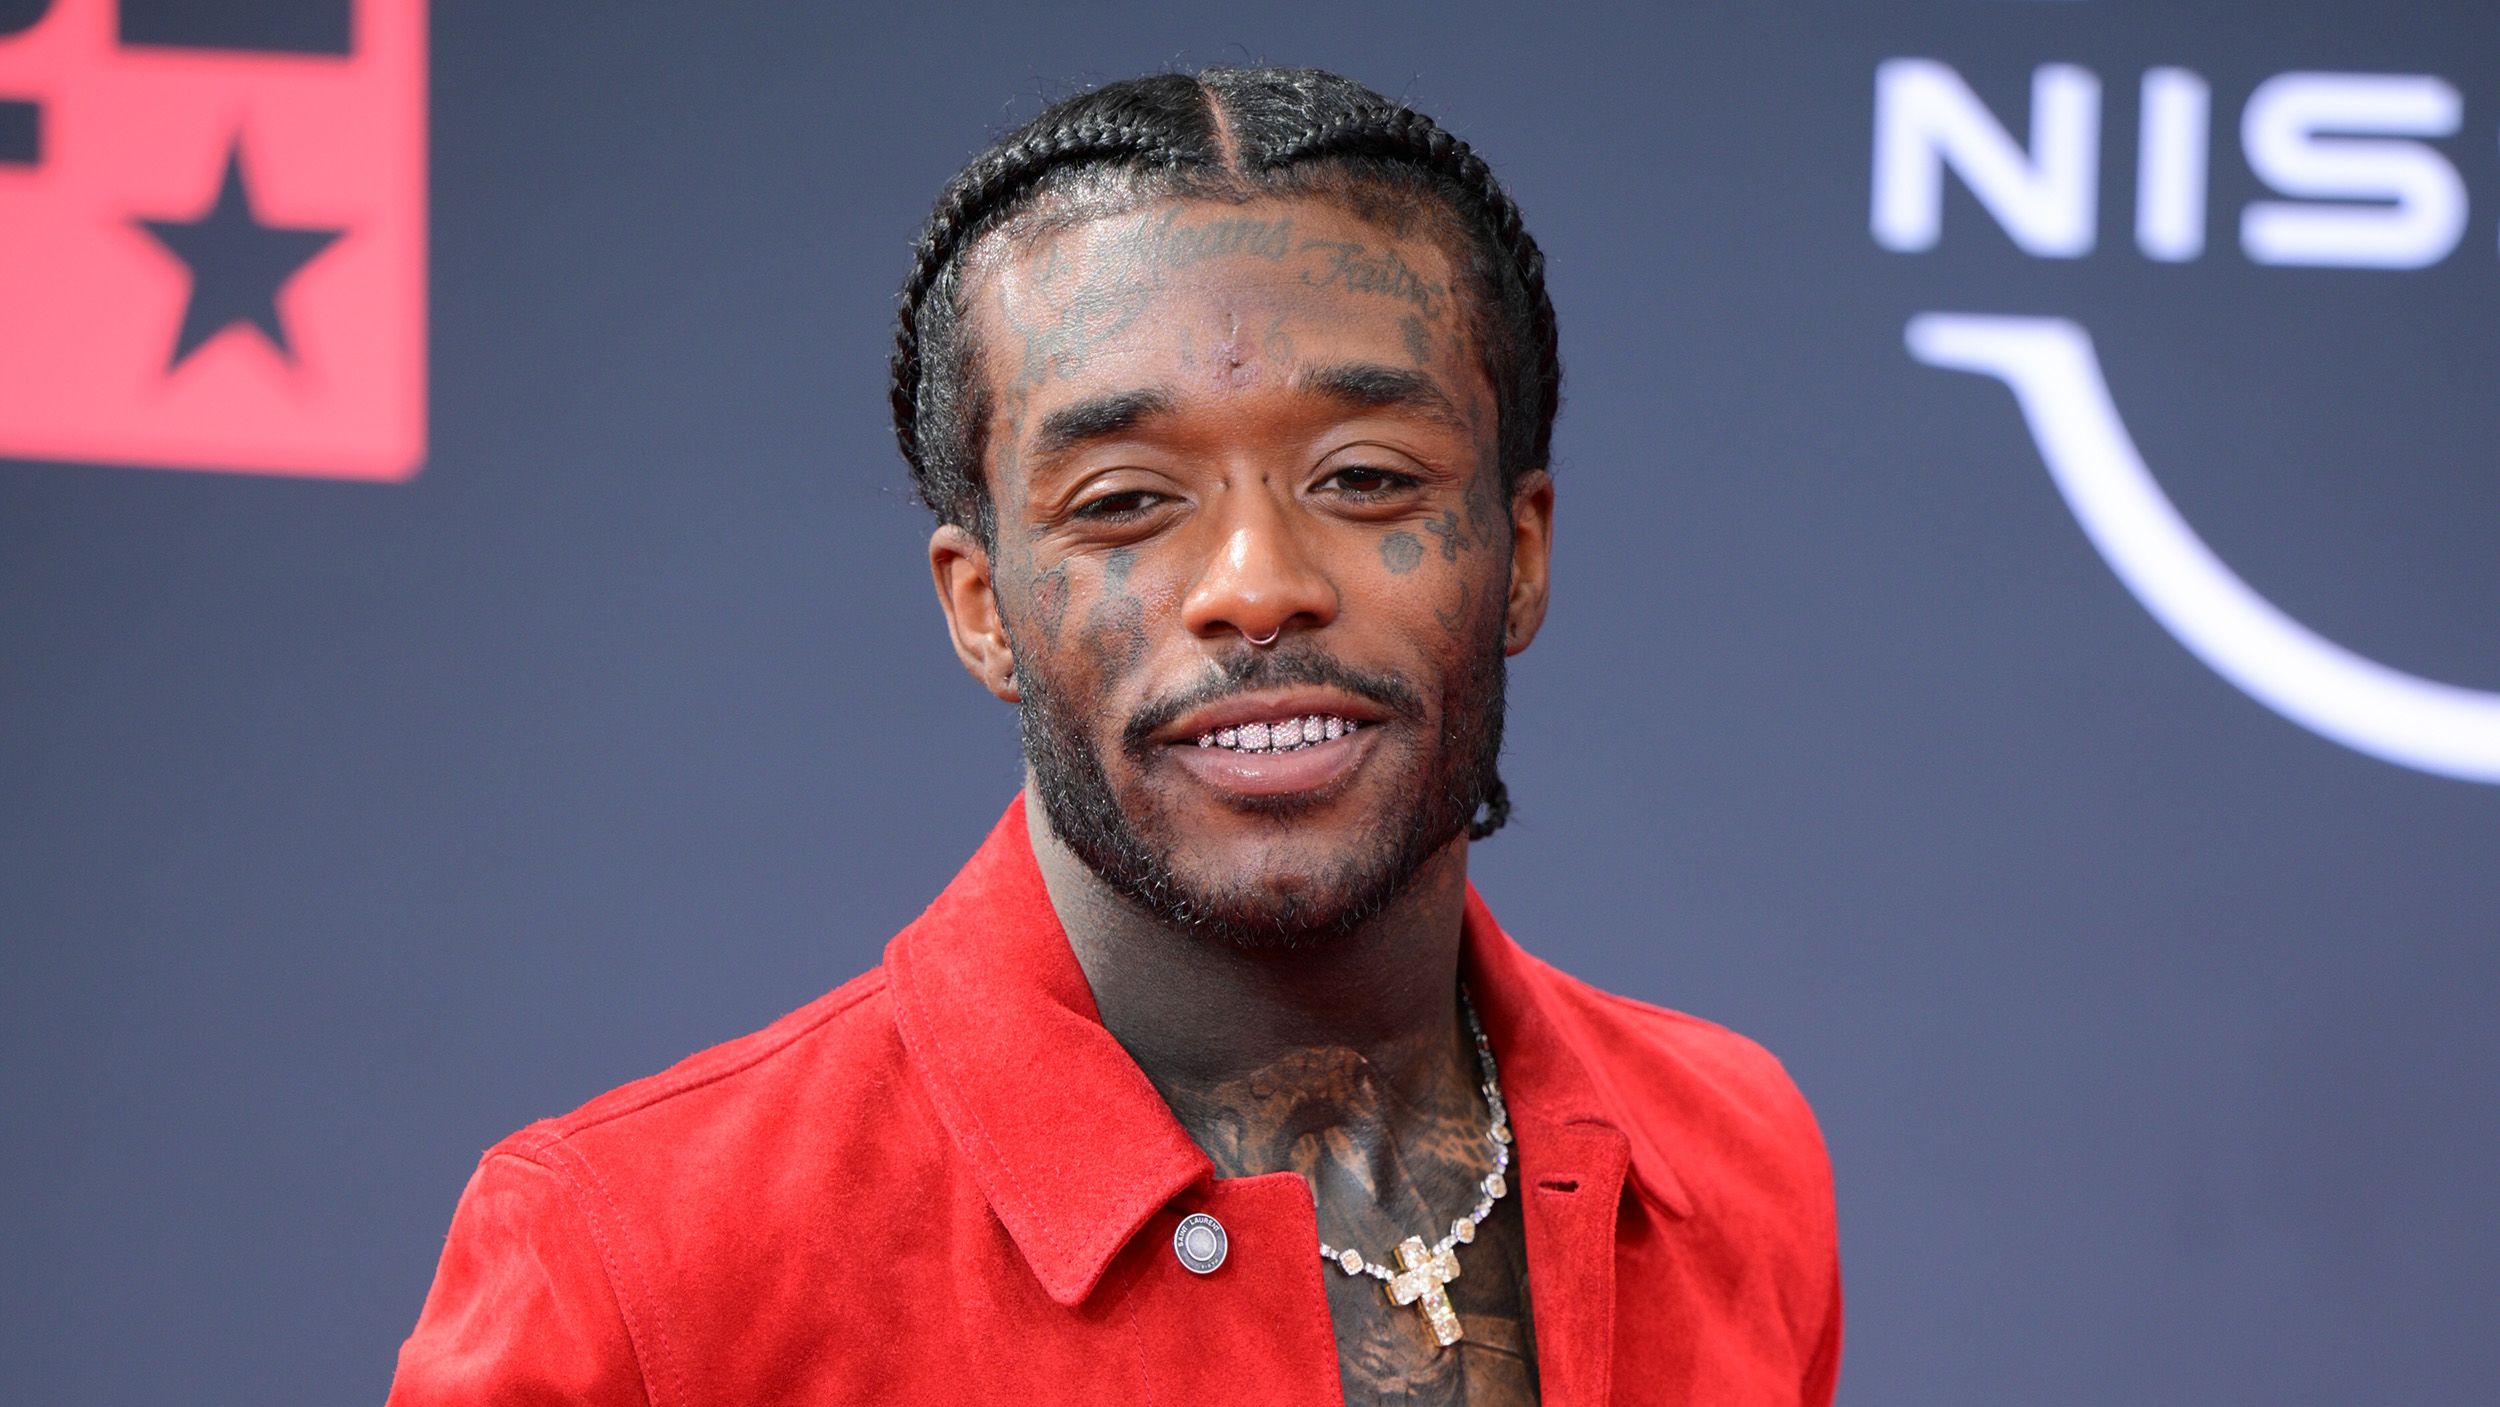 Lil Uzi Vert ‘Never Hesitated’ To Change Their Pronouns And Explained Why [Photos]